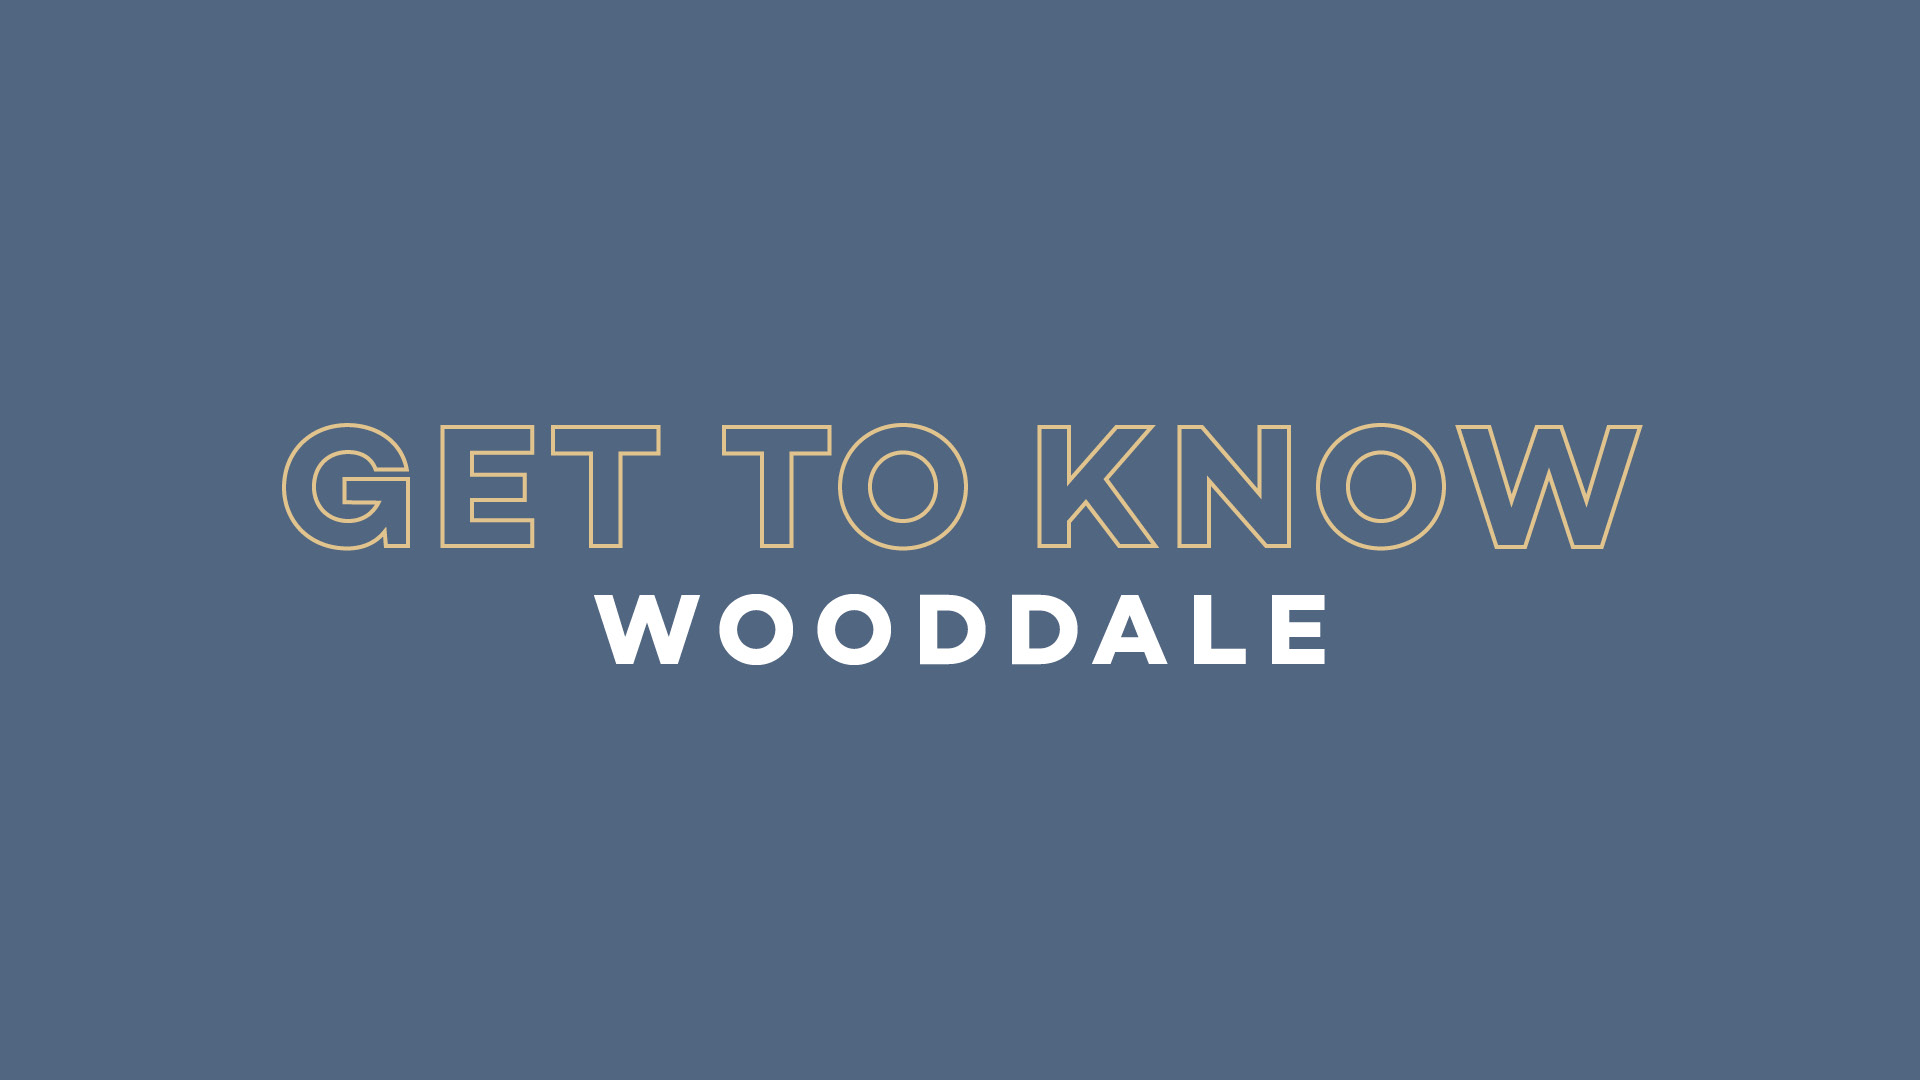 Get to Know Wooddale